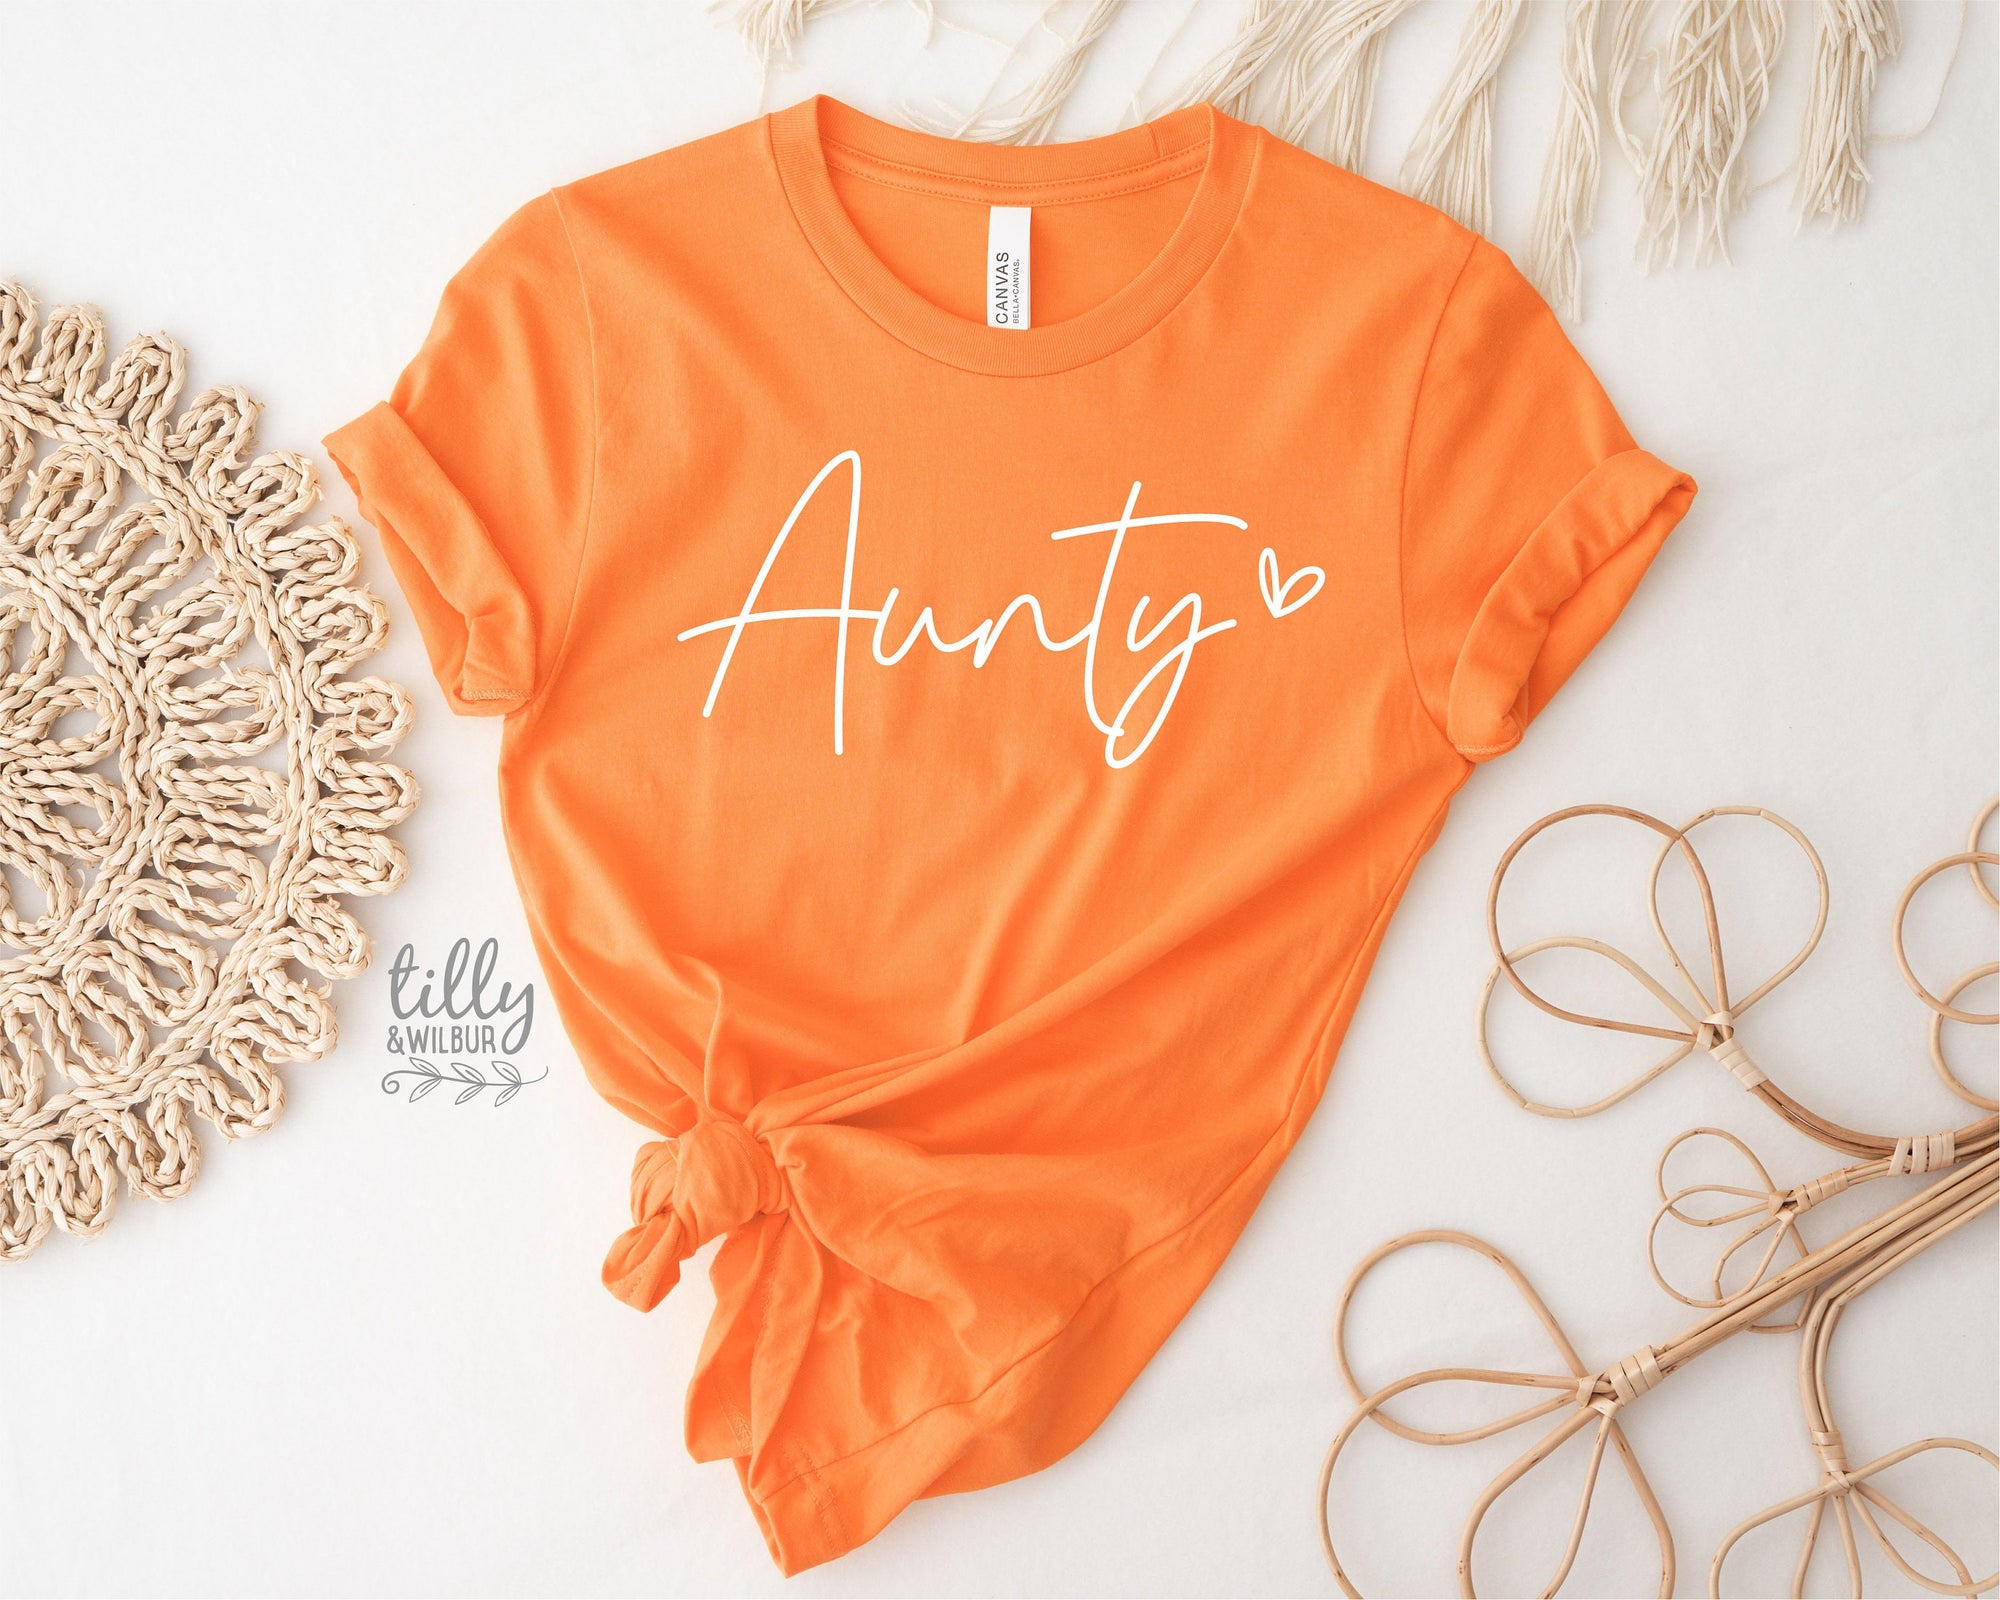 Aunty T-Shirt, Pregnancy Announcement T-Shirt, I'm Going To Be An Aunty, Baby Shower Gift, Aunty, Auntie, Sister Gift, Orange With White